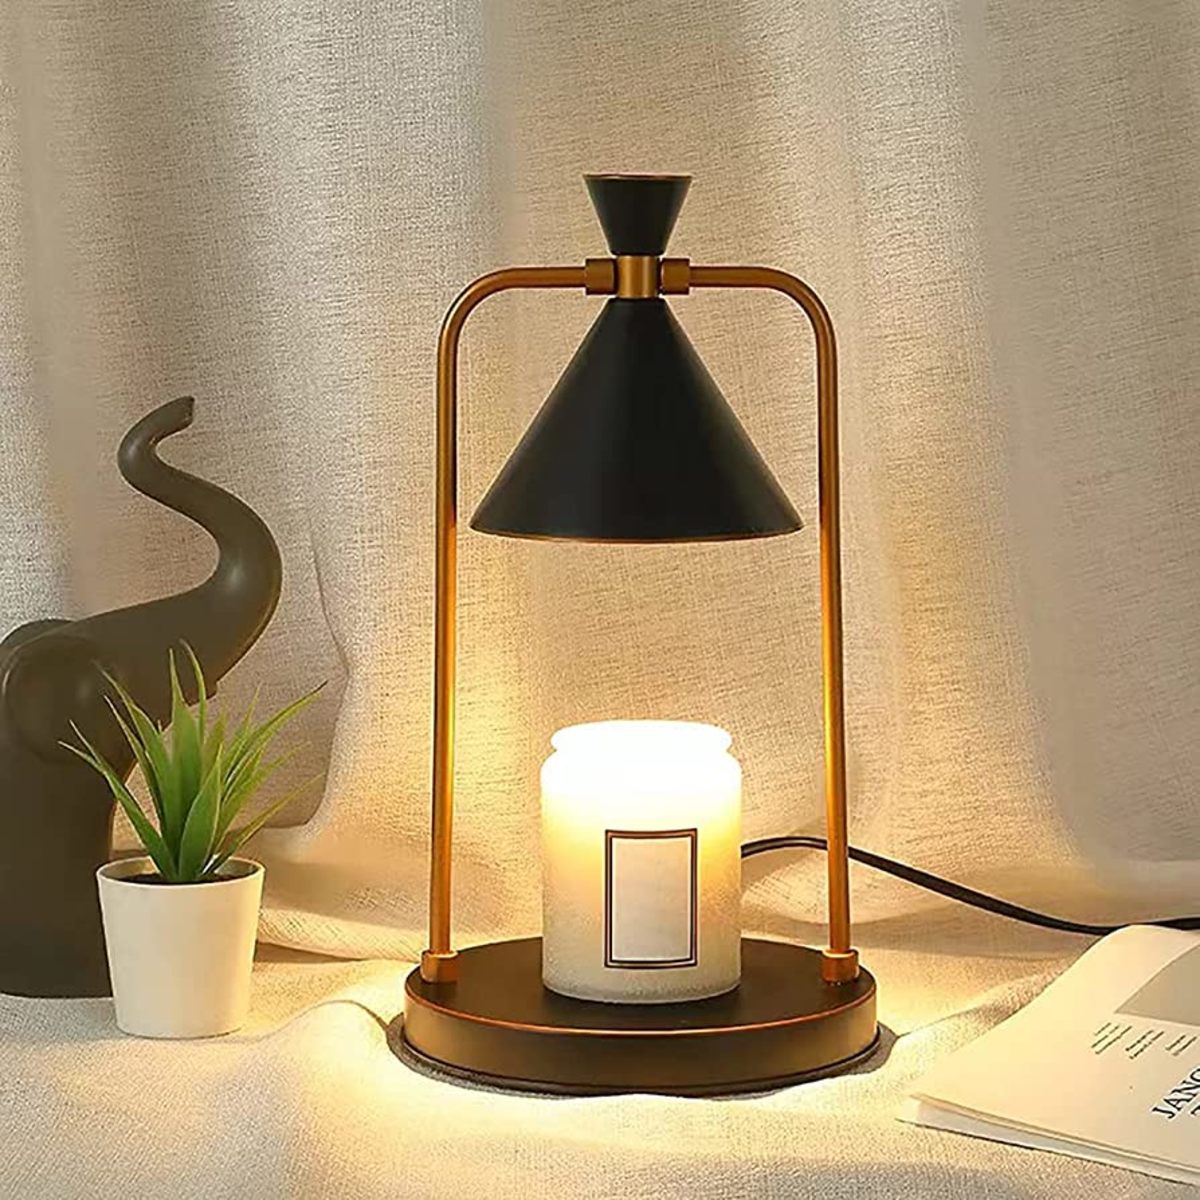 The New Way to Enjoy Scents: Electric Candle Warmers